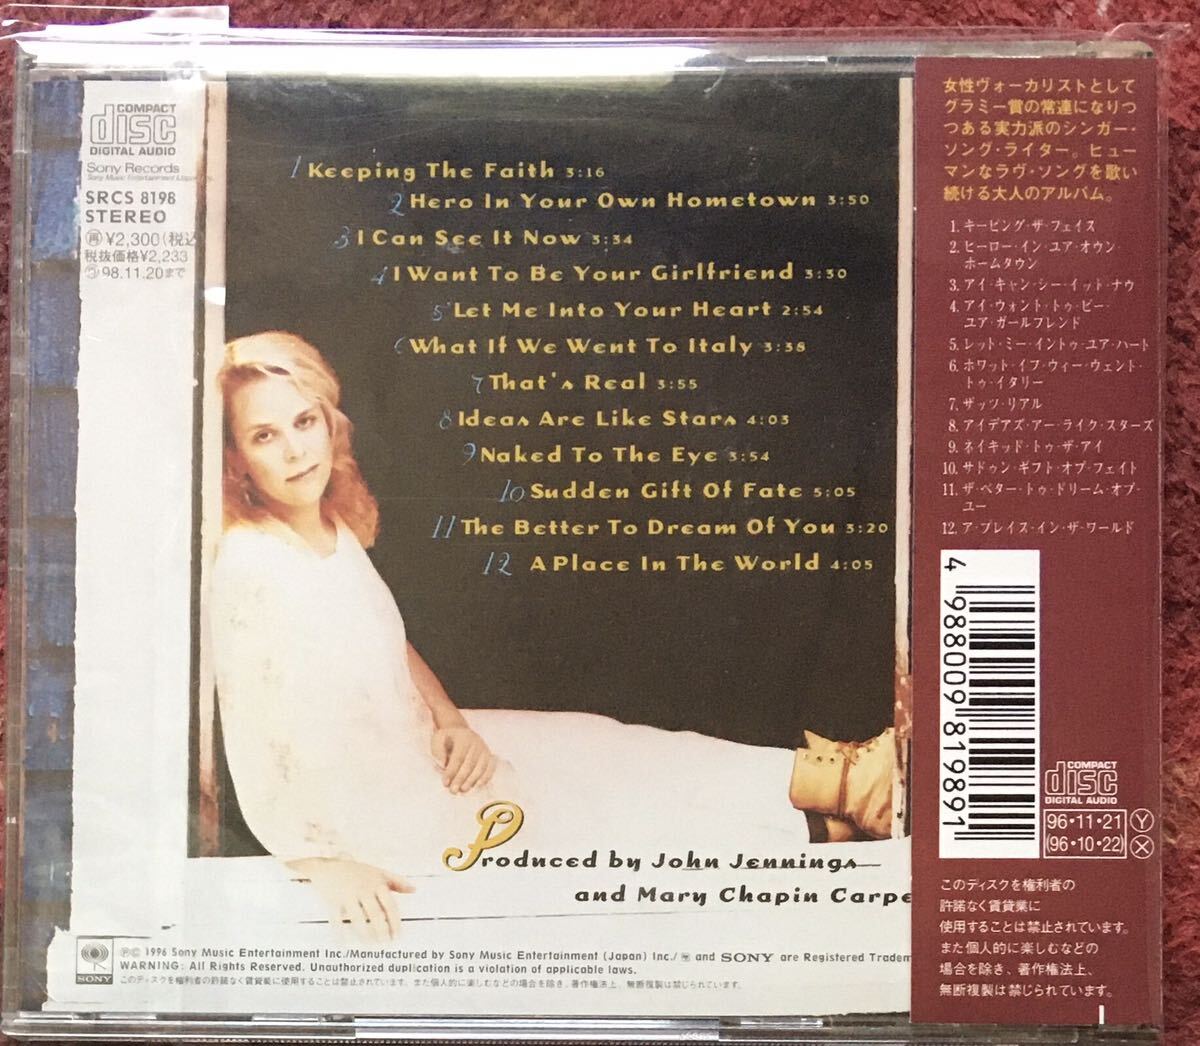 Mary Chapin Carpenter/96年傑作/フォークロック/カントリーロック/ソフトロック/AOR/Dave Mattacks(Fairport Convention)/Shawn Colvinの画像2